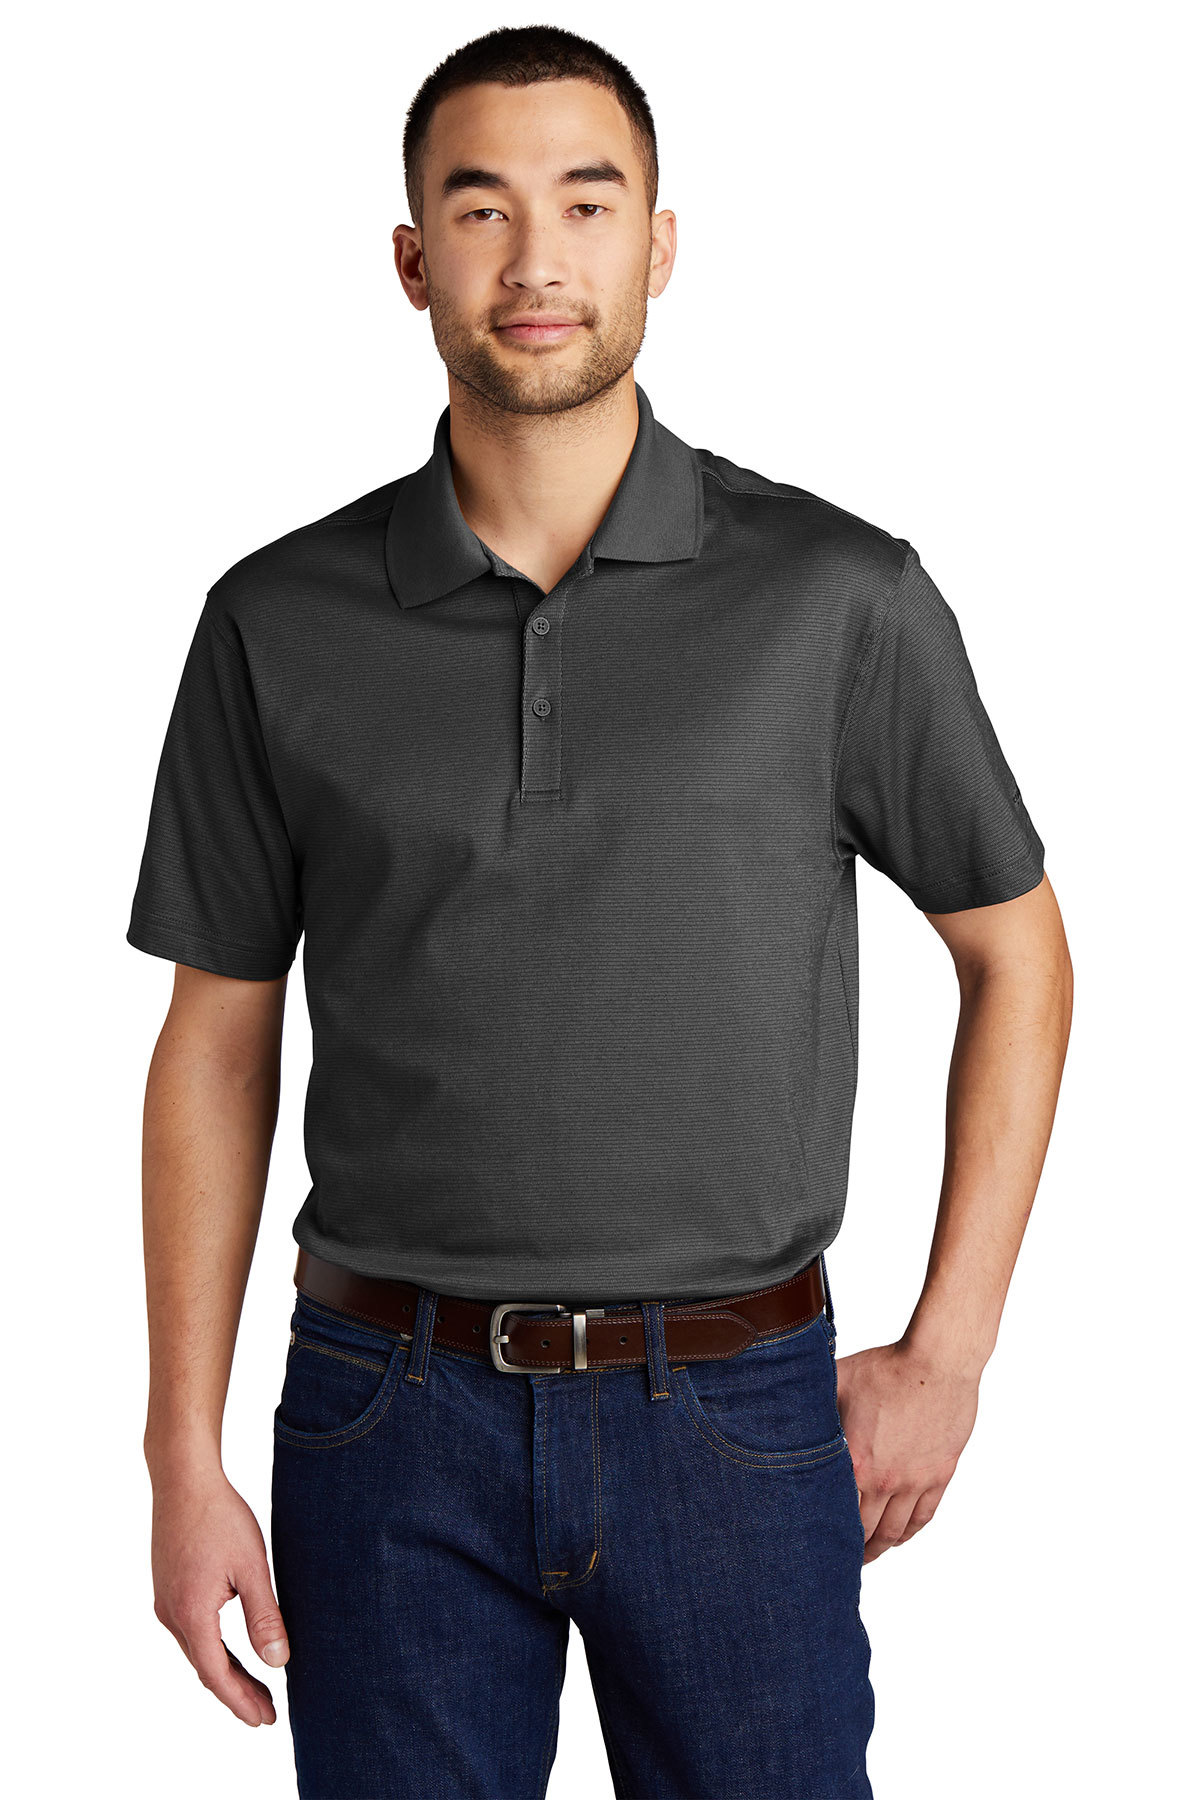 Eddie Bauer Performance Polo | Product | Company Casuals